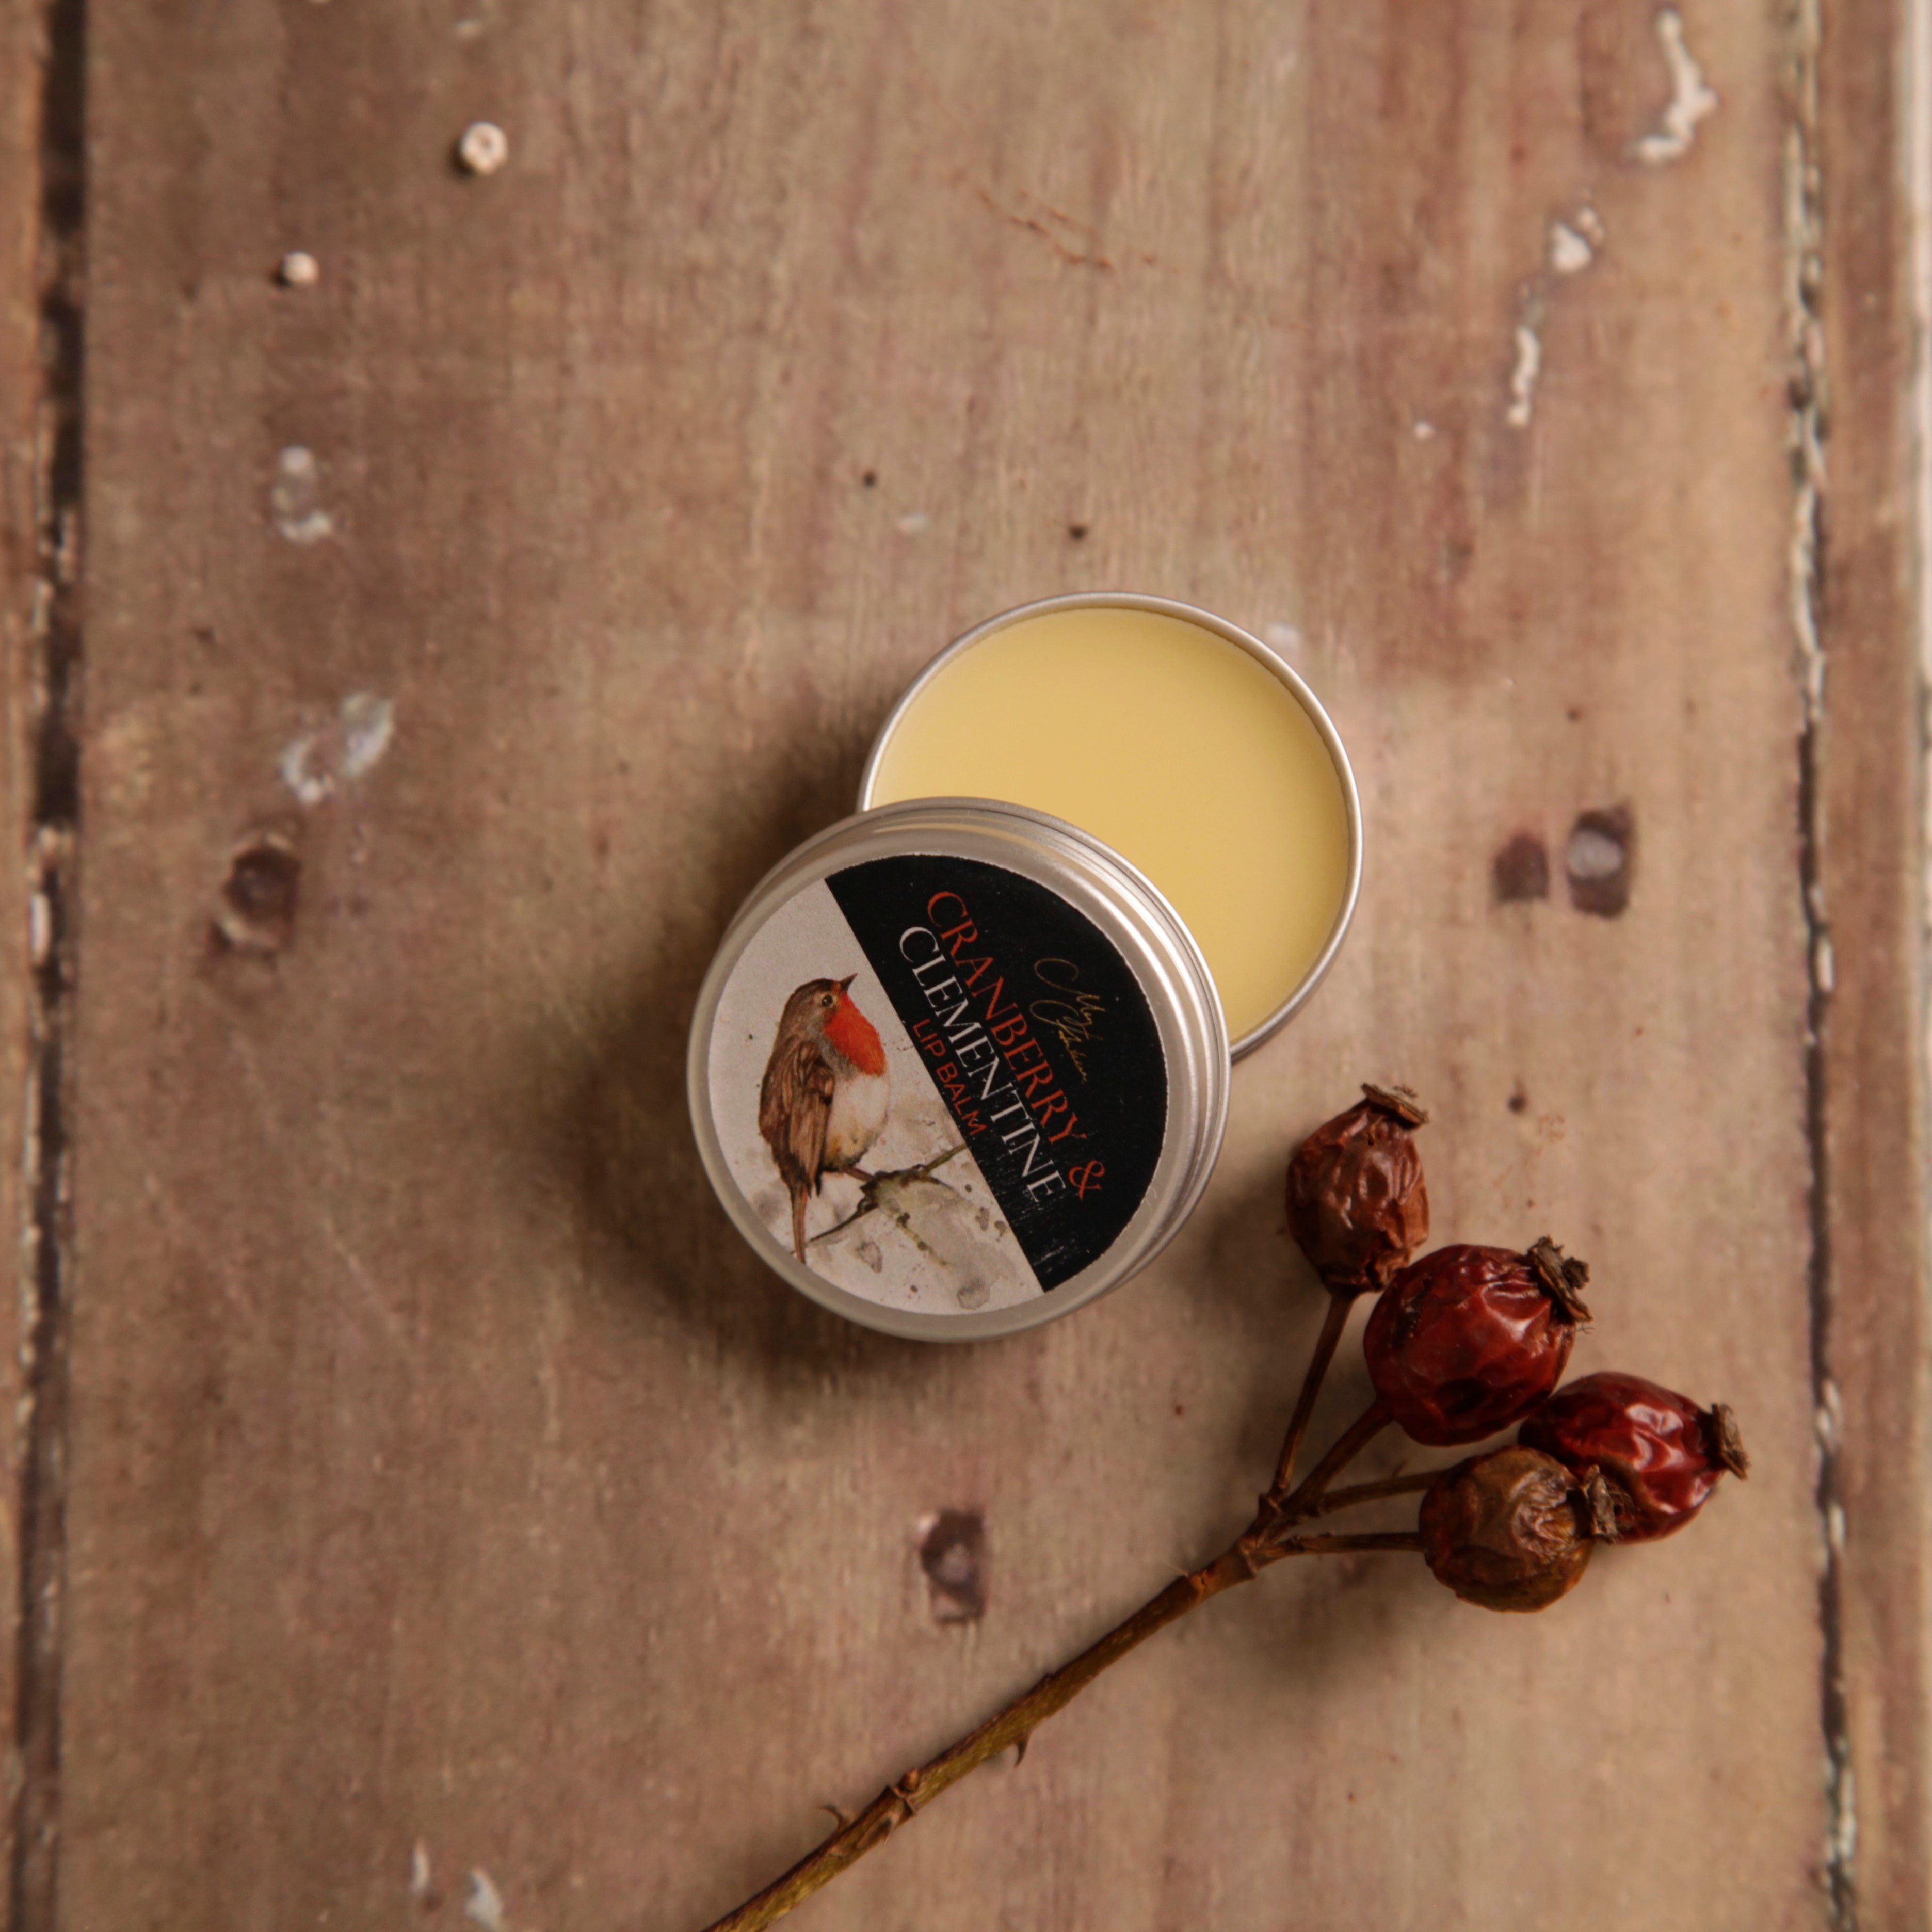 Cranberry and Clementine Lip Balm With Robin Design